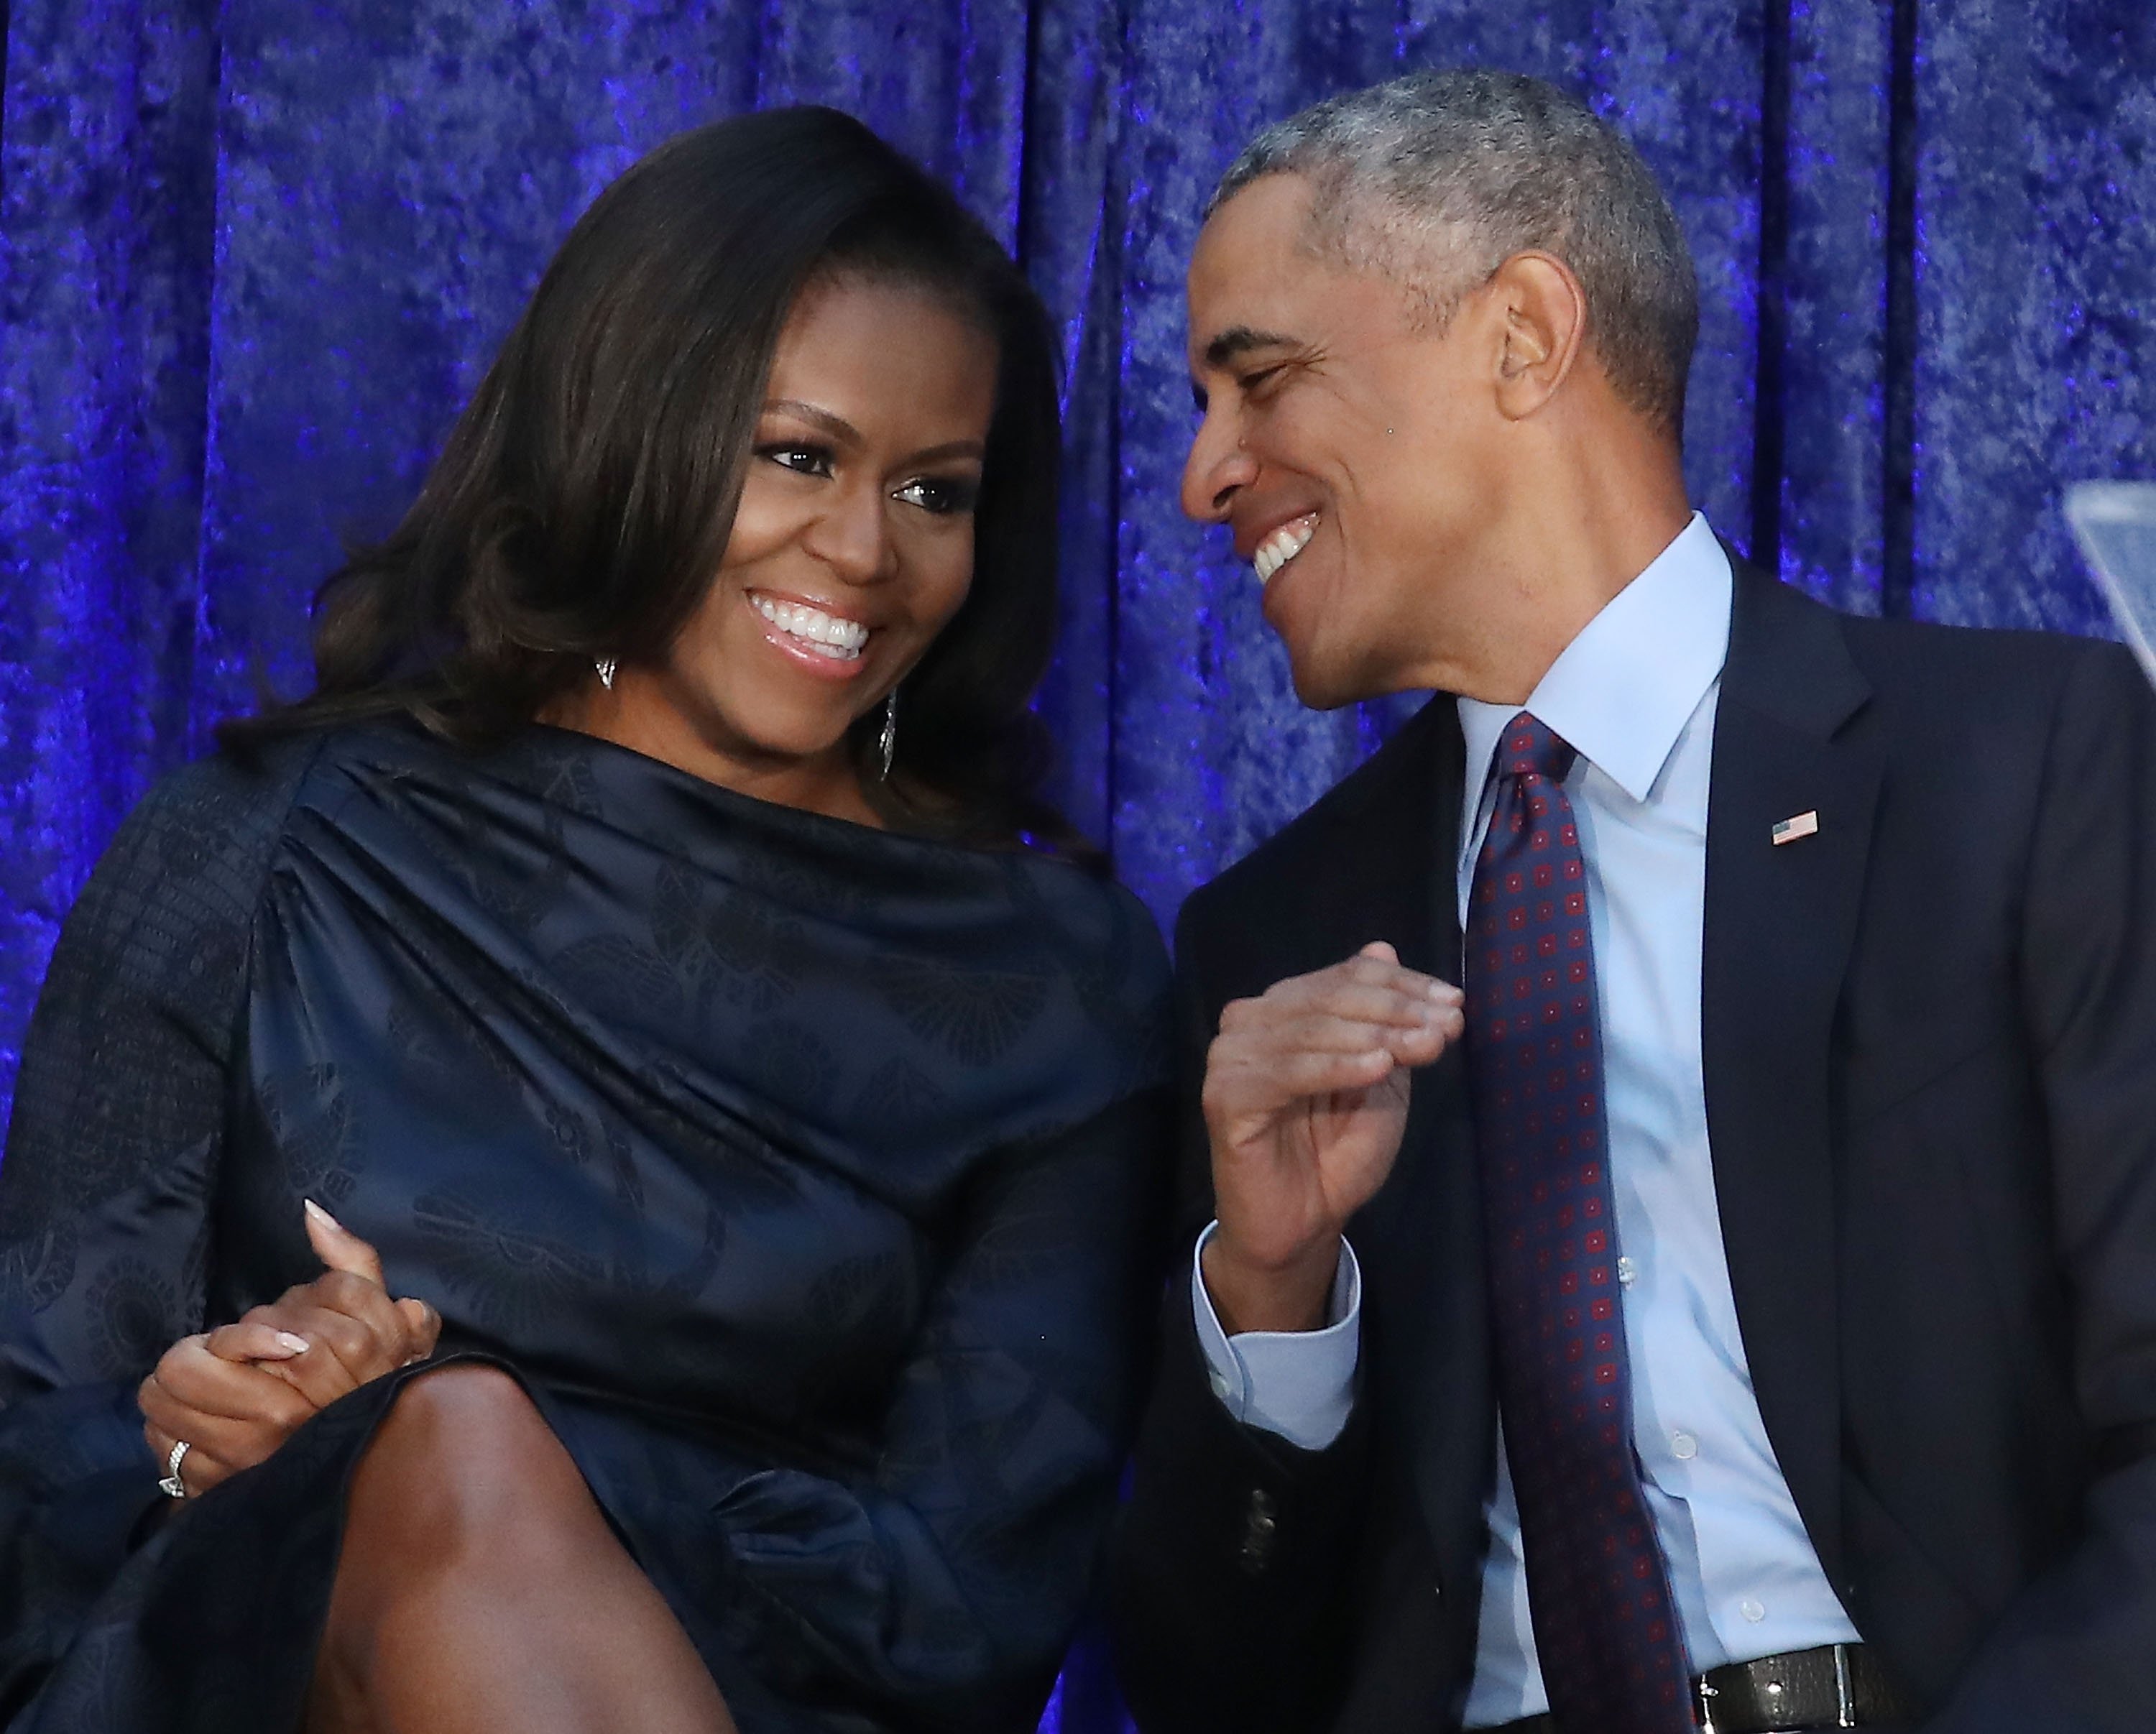 Barack Obama & Michelle Obama at the Smithsonian's National Portrait Gallery on Feb. 12, 2018 in Washington, DC. | Photo: Getty Images 